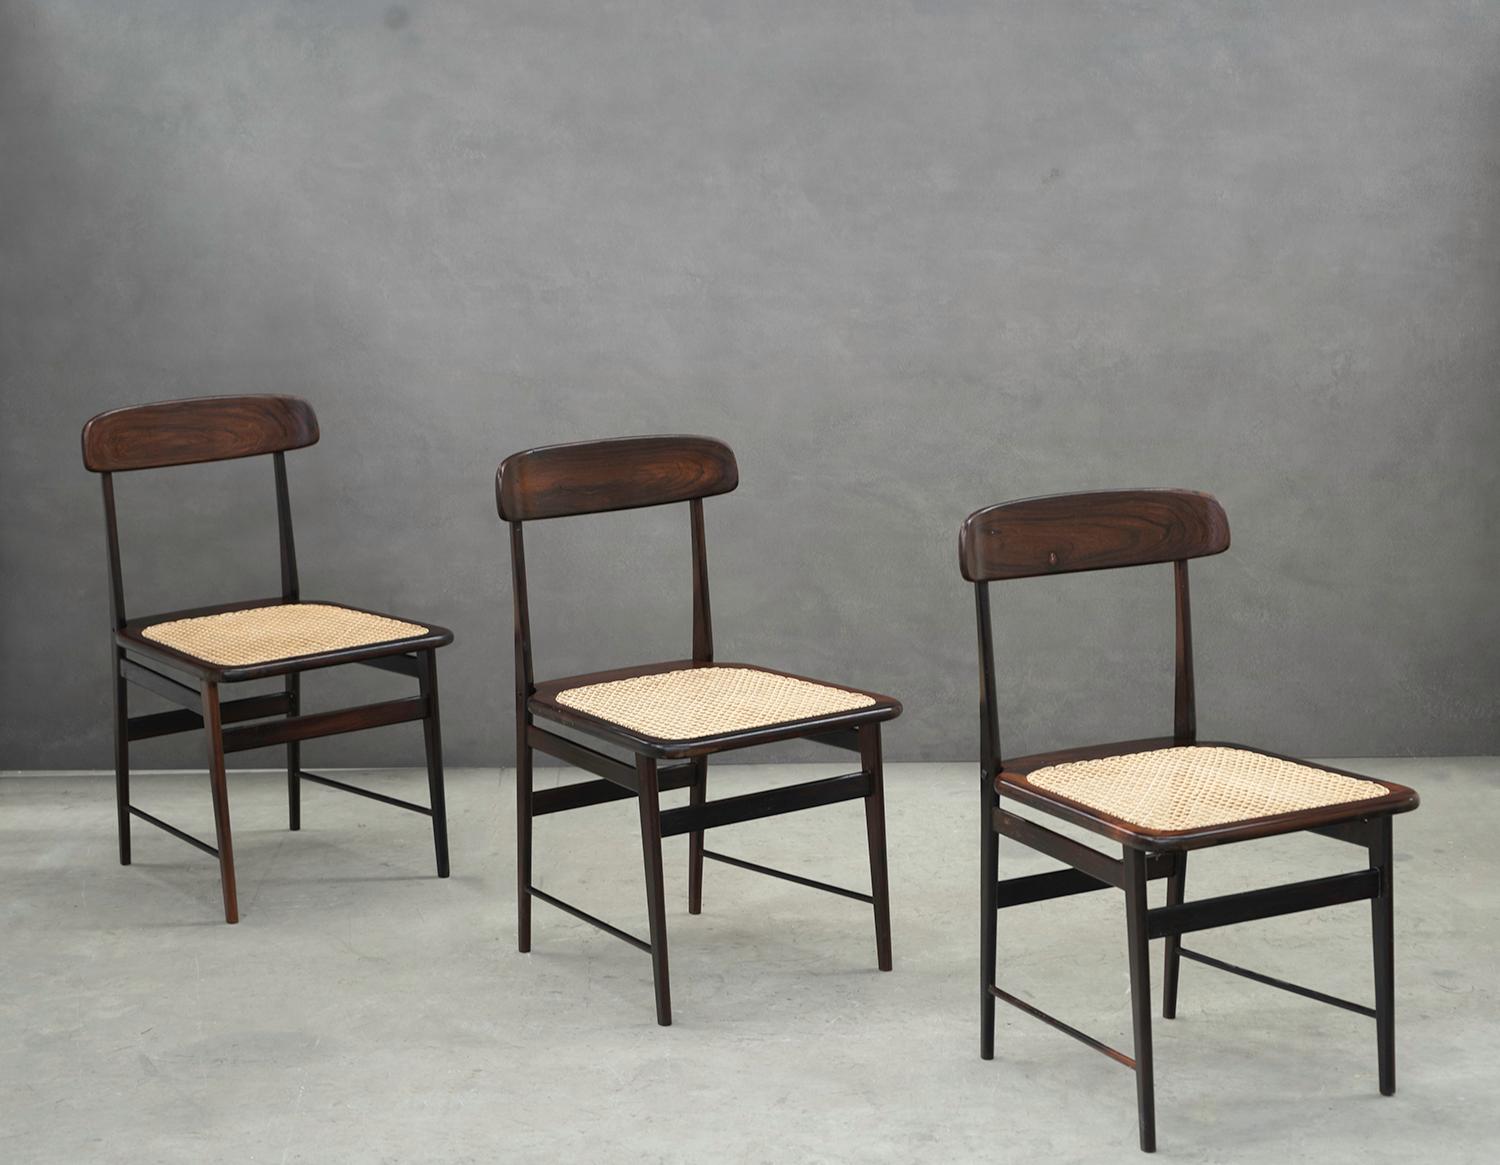 Set of ‘Lucio’ Chairs by Sergio Rodrigues, Brazilian Midcentury Design 4